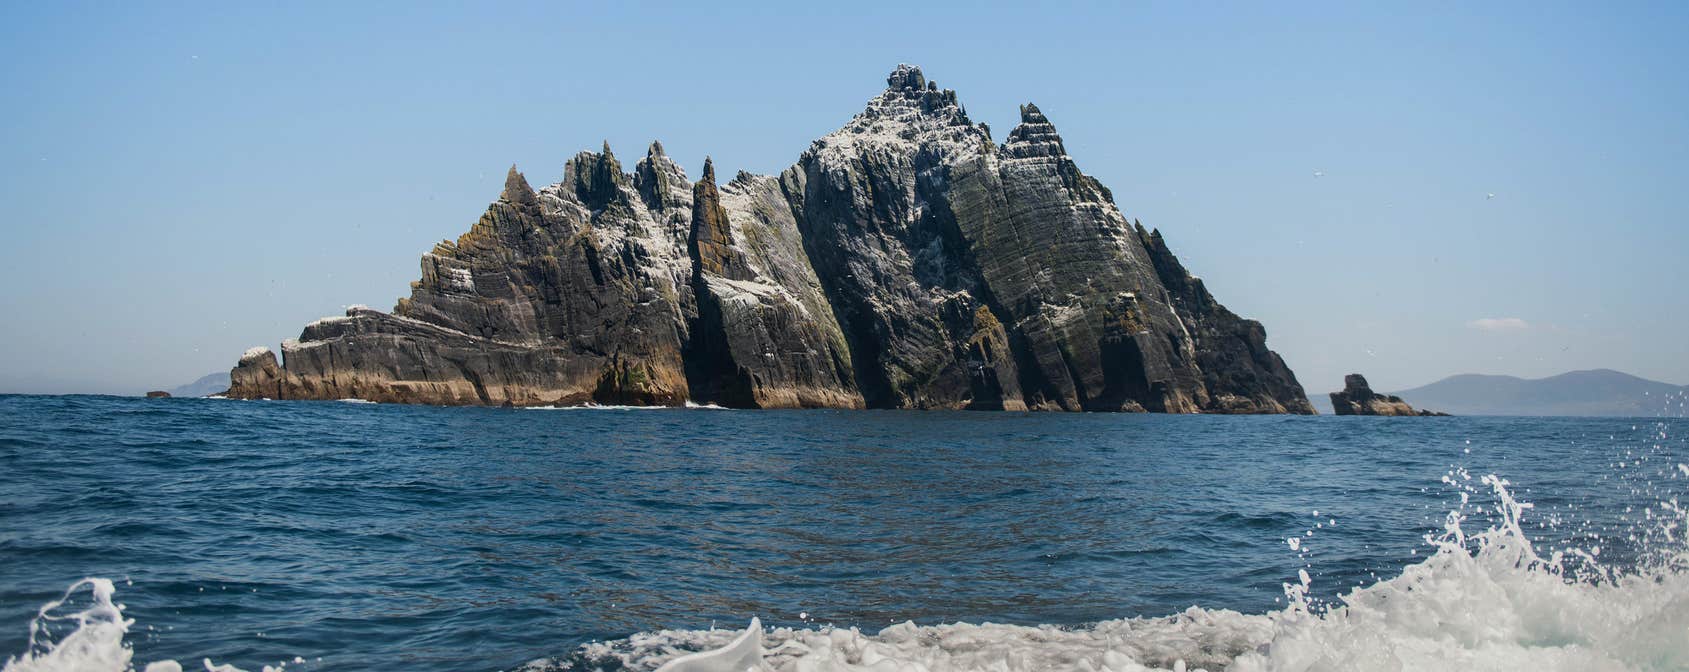 Skellig Michael (Sceilg Mhichíl) rising out of the Atlantic along the Wild Atlantic Way